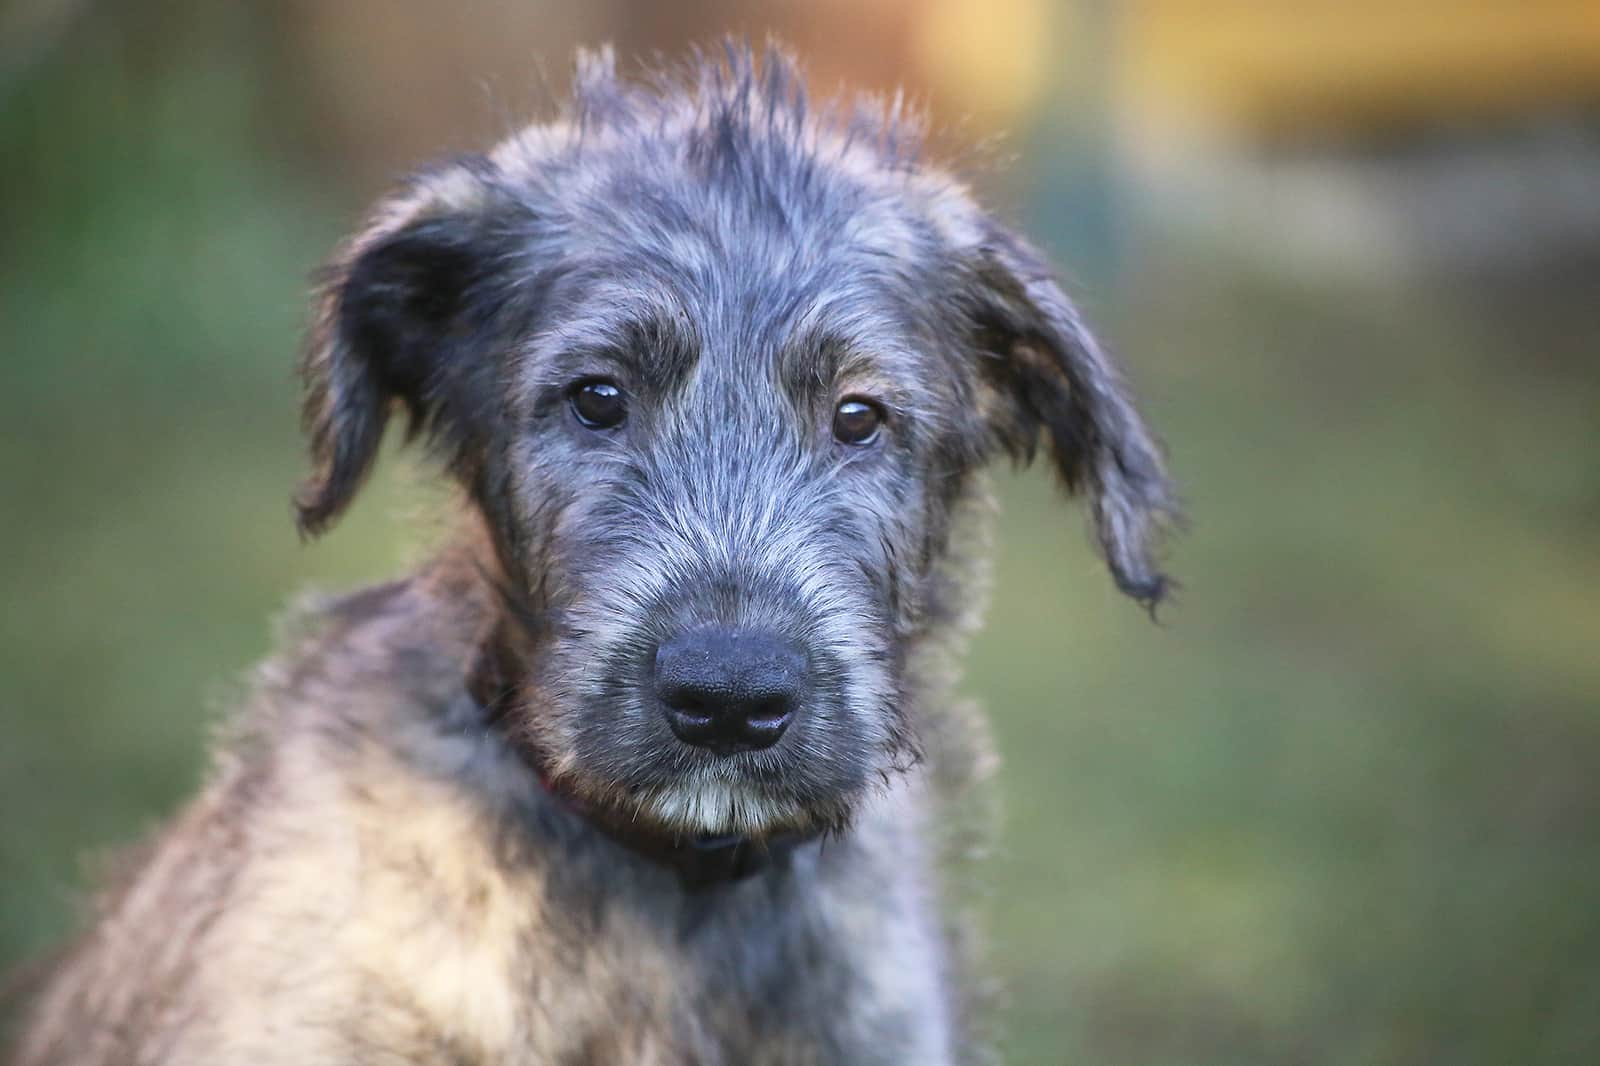 puppy of breed the Irish Wolfhound sits on a green grass in the yard